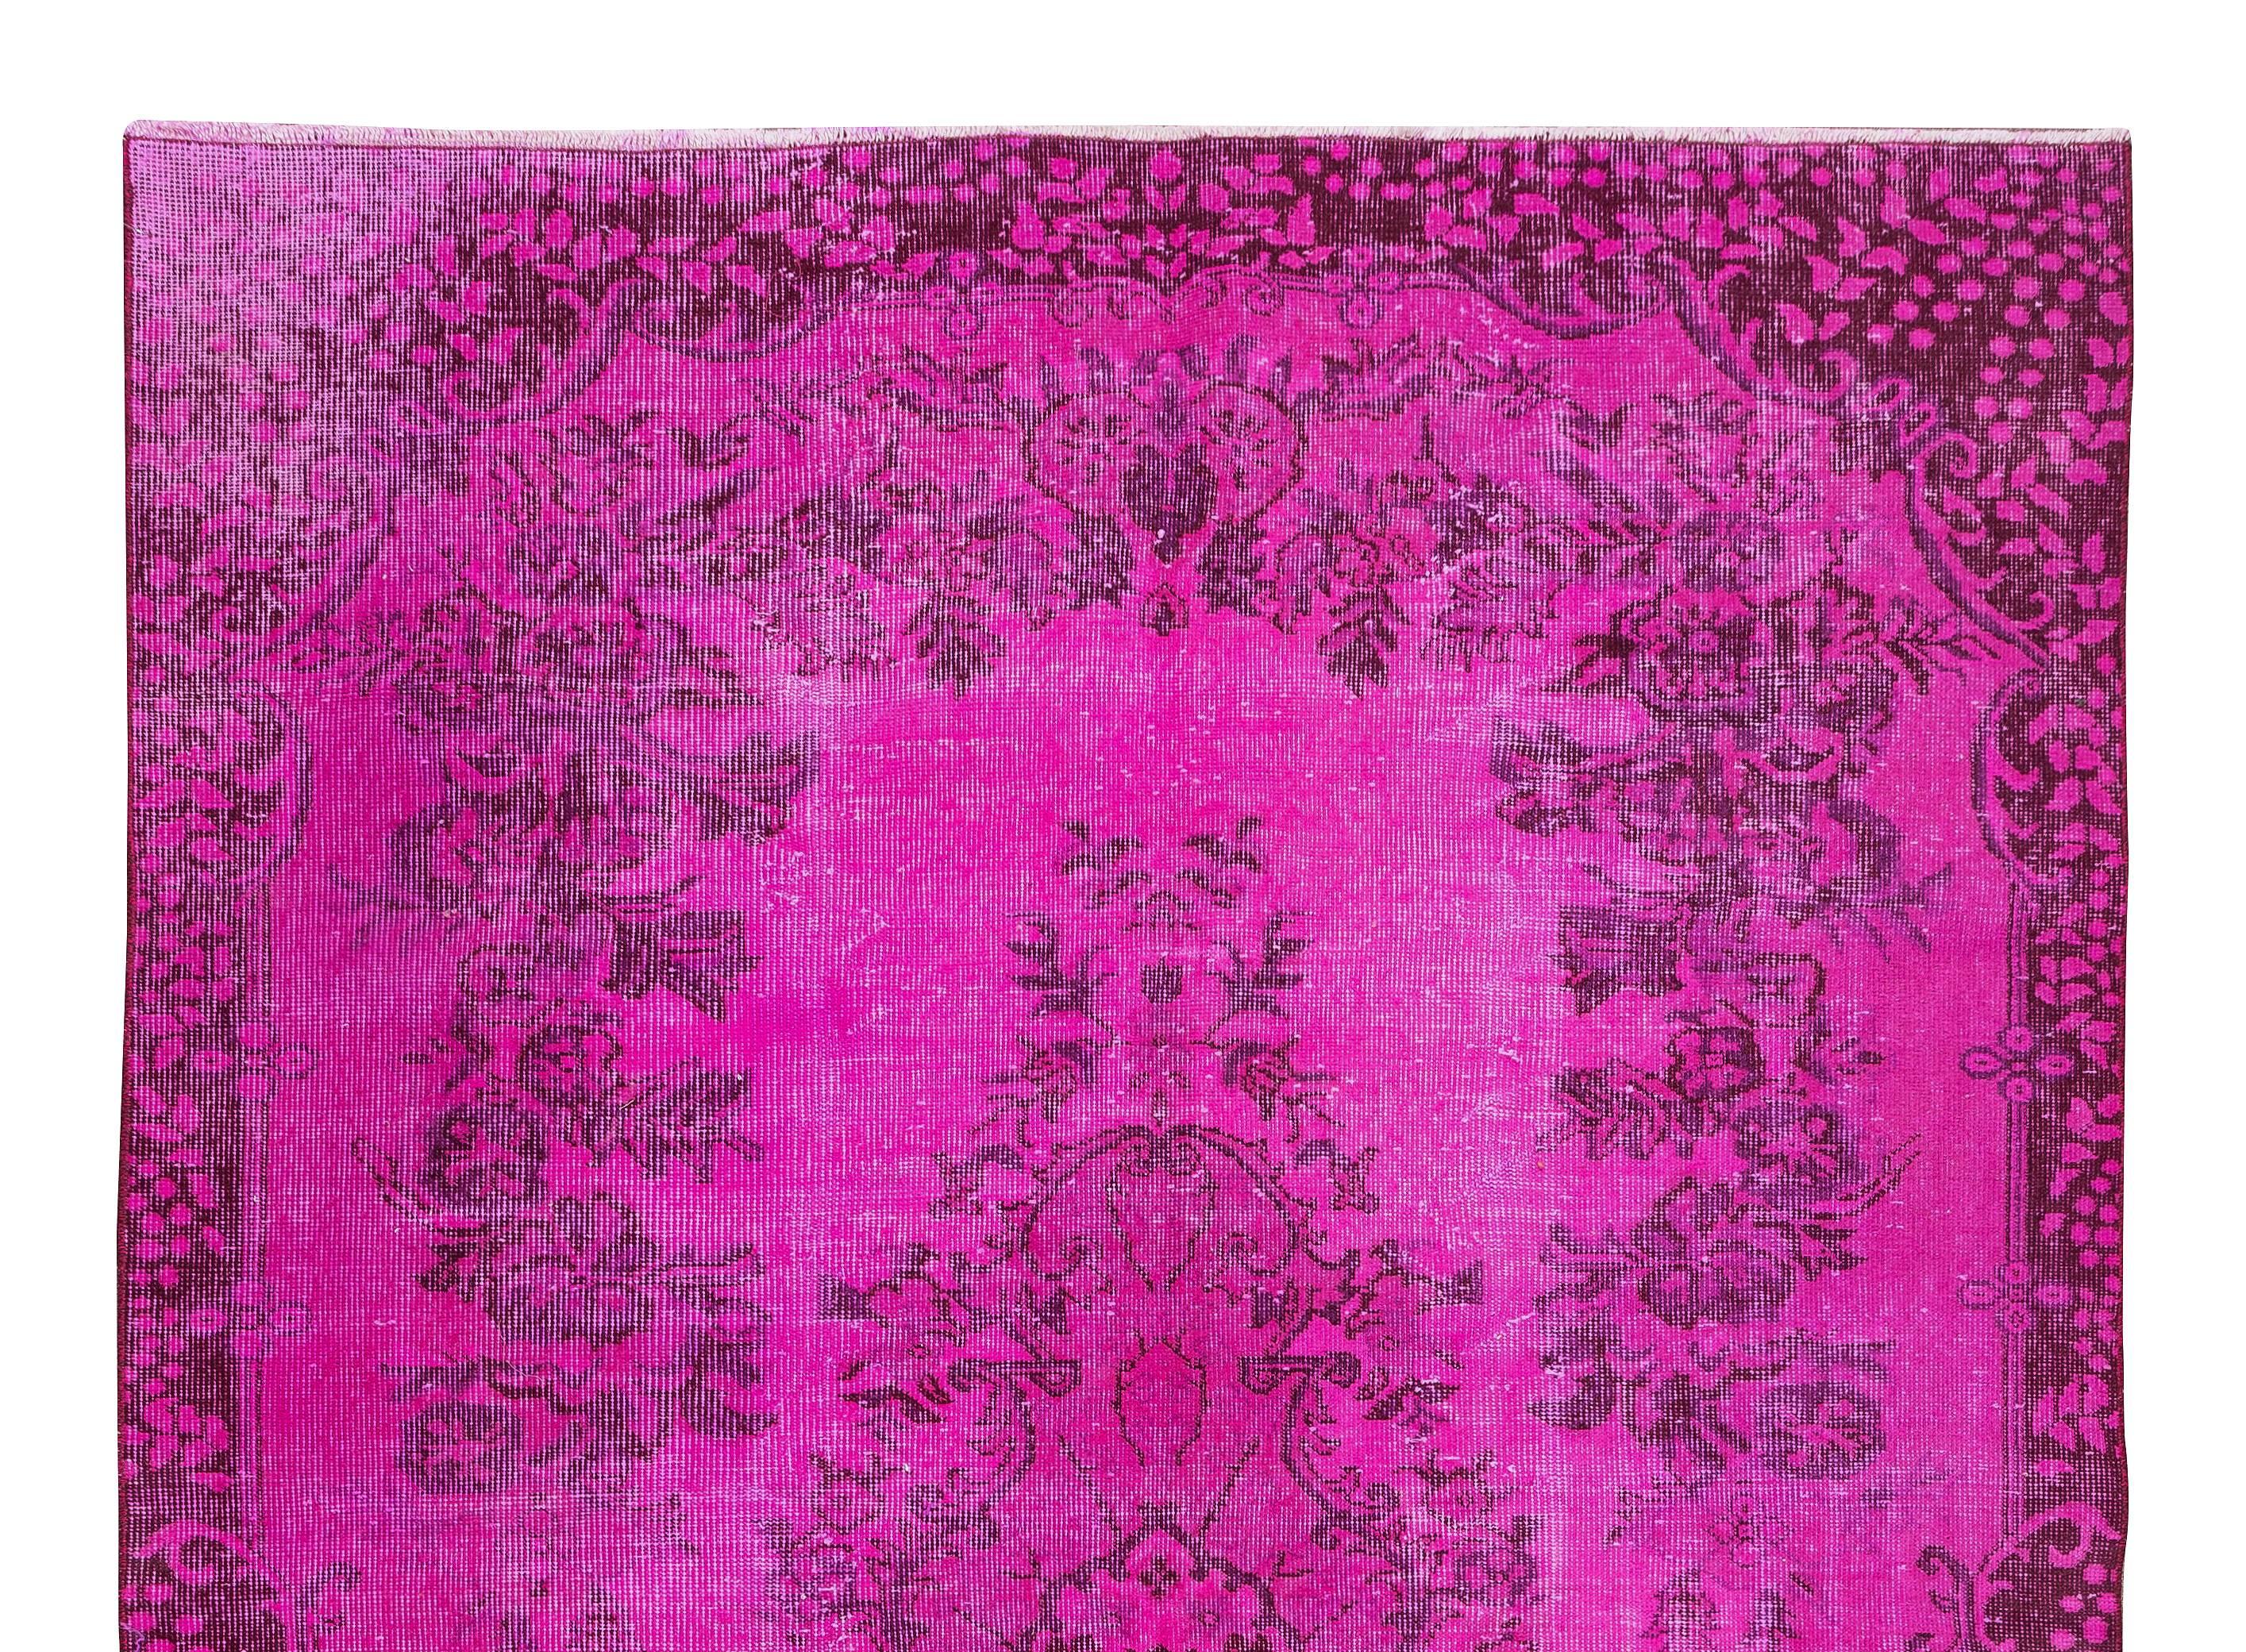 Hand-Knotted 5.8x8.7 Ft Vintage Rug OverDyed in Pink for Modern Interiors, Handmade in Turkey For Sale